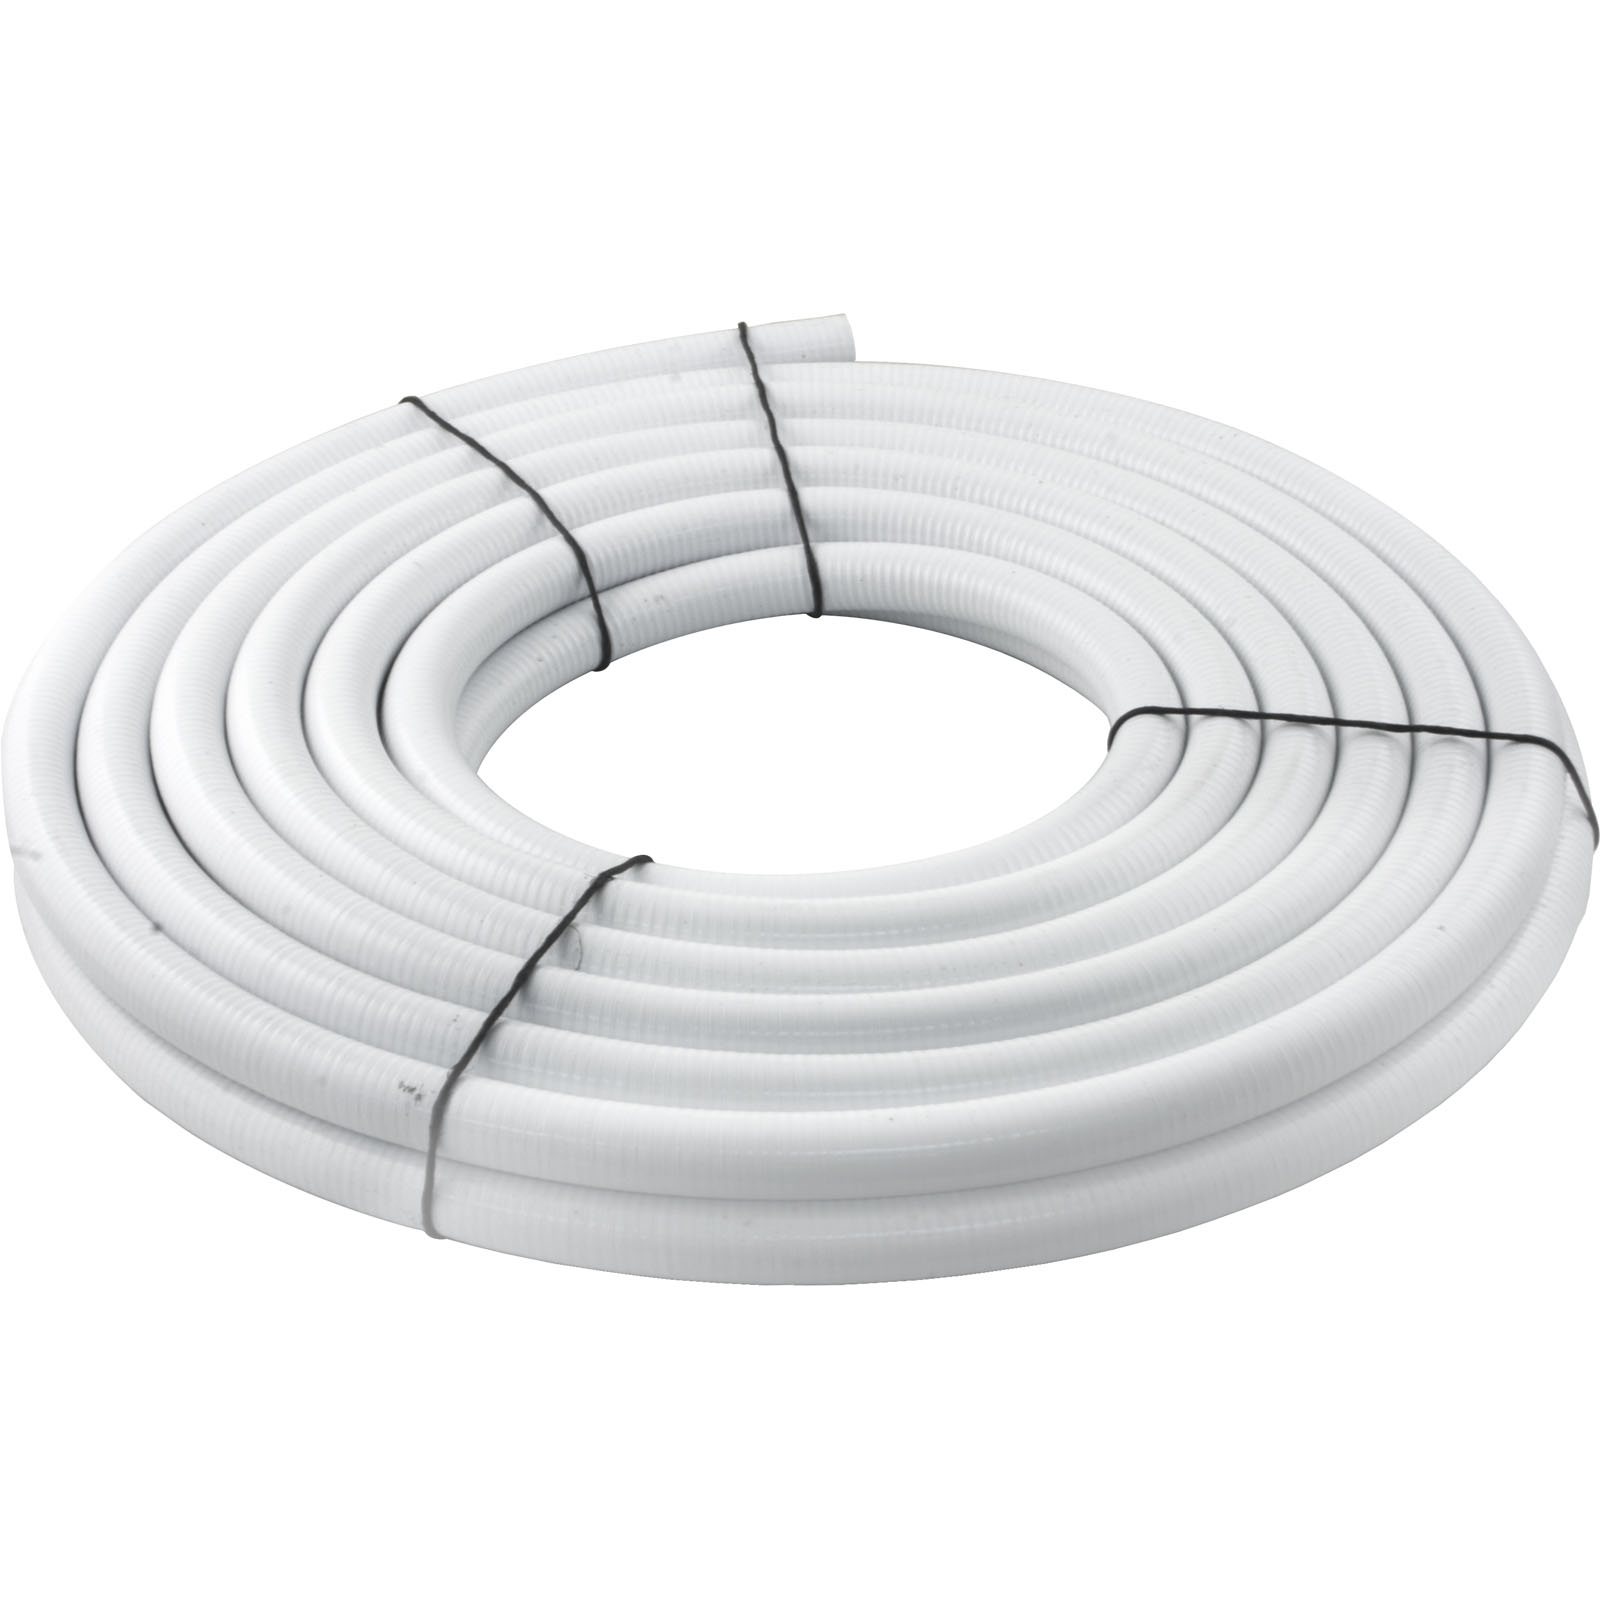 Picture of 120-0110-50R Flexible PVC Pipe 1/2" x 50 foot